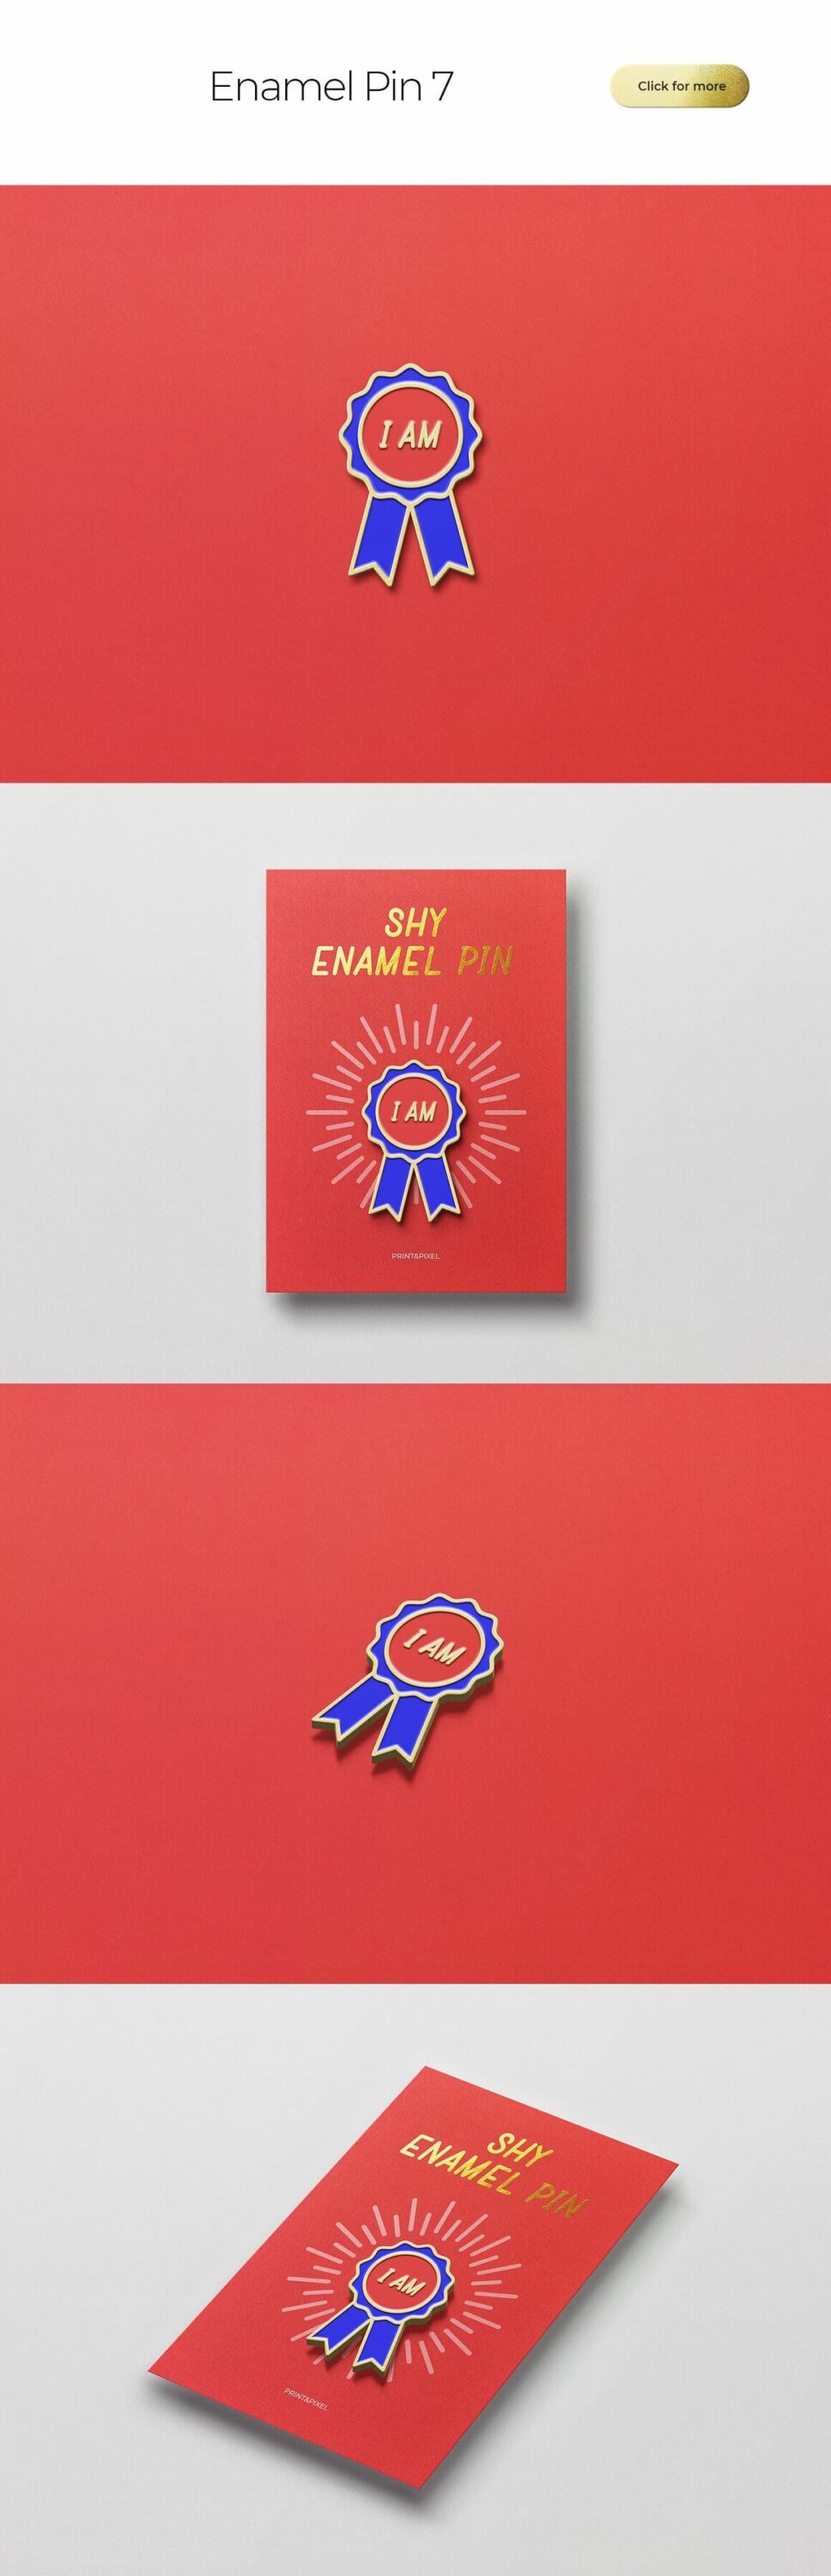 Cards with inscription "Shy enamel pin" on the red and white backgrounds.